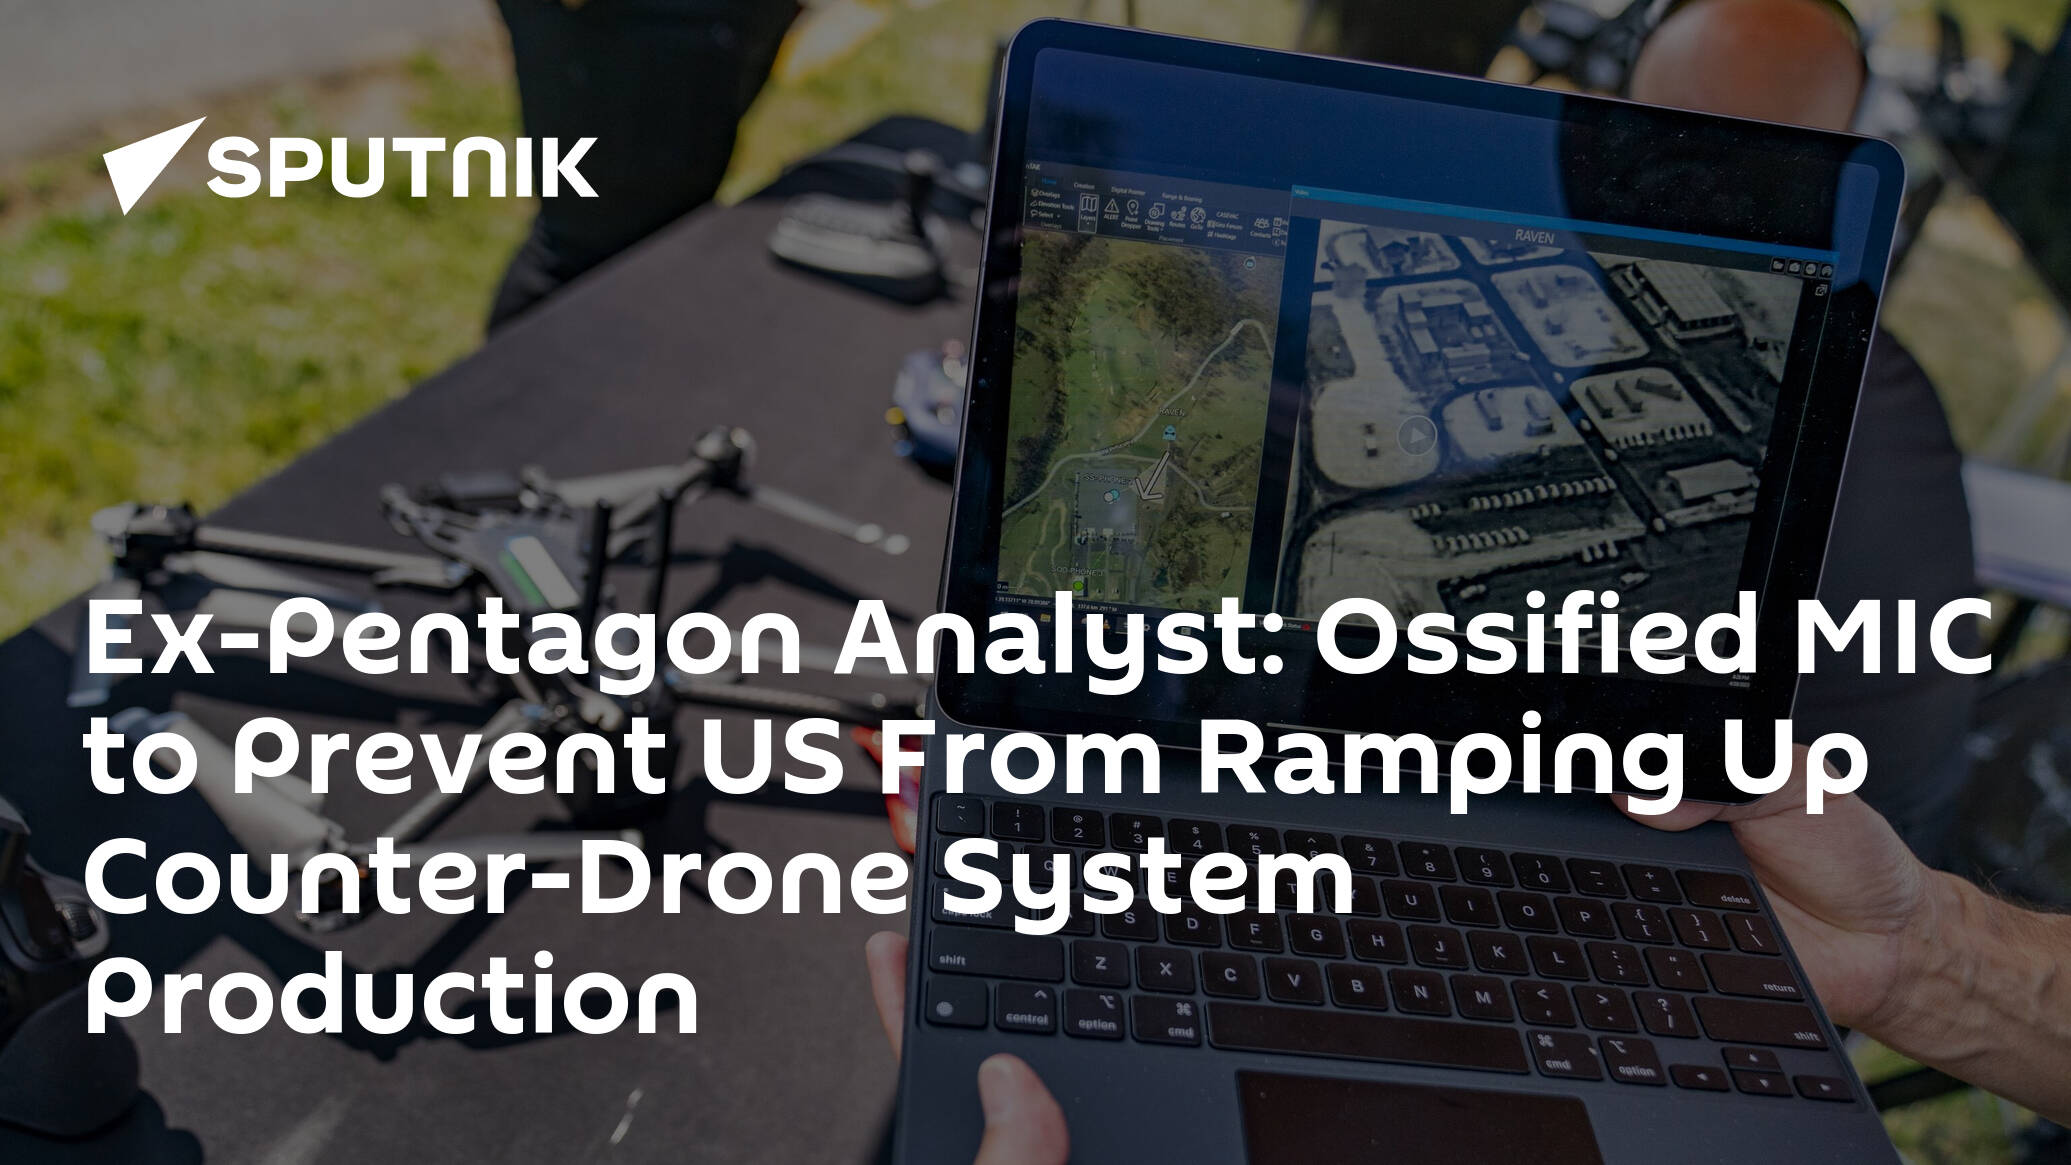 Ex-Pentagon Analyst: Ossified MIC to Prevent US From Ramping Up Counter-Drone System Production